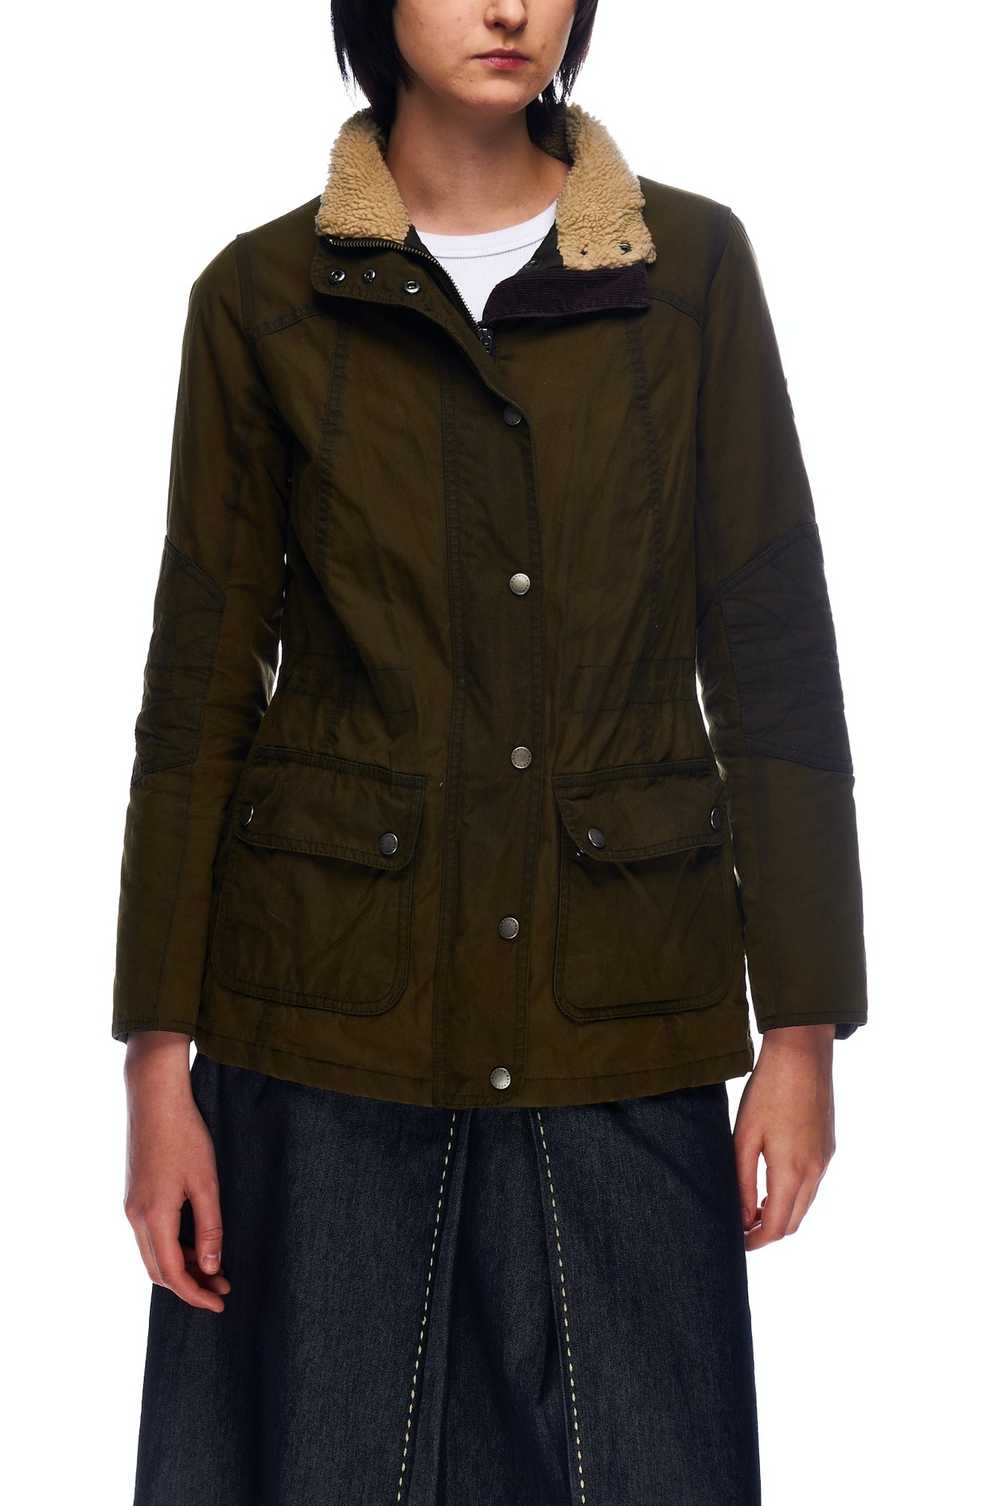 Barbour BARBOUR Jacket Olive Green Wax Cotton - image 2